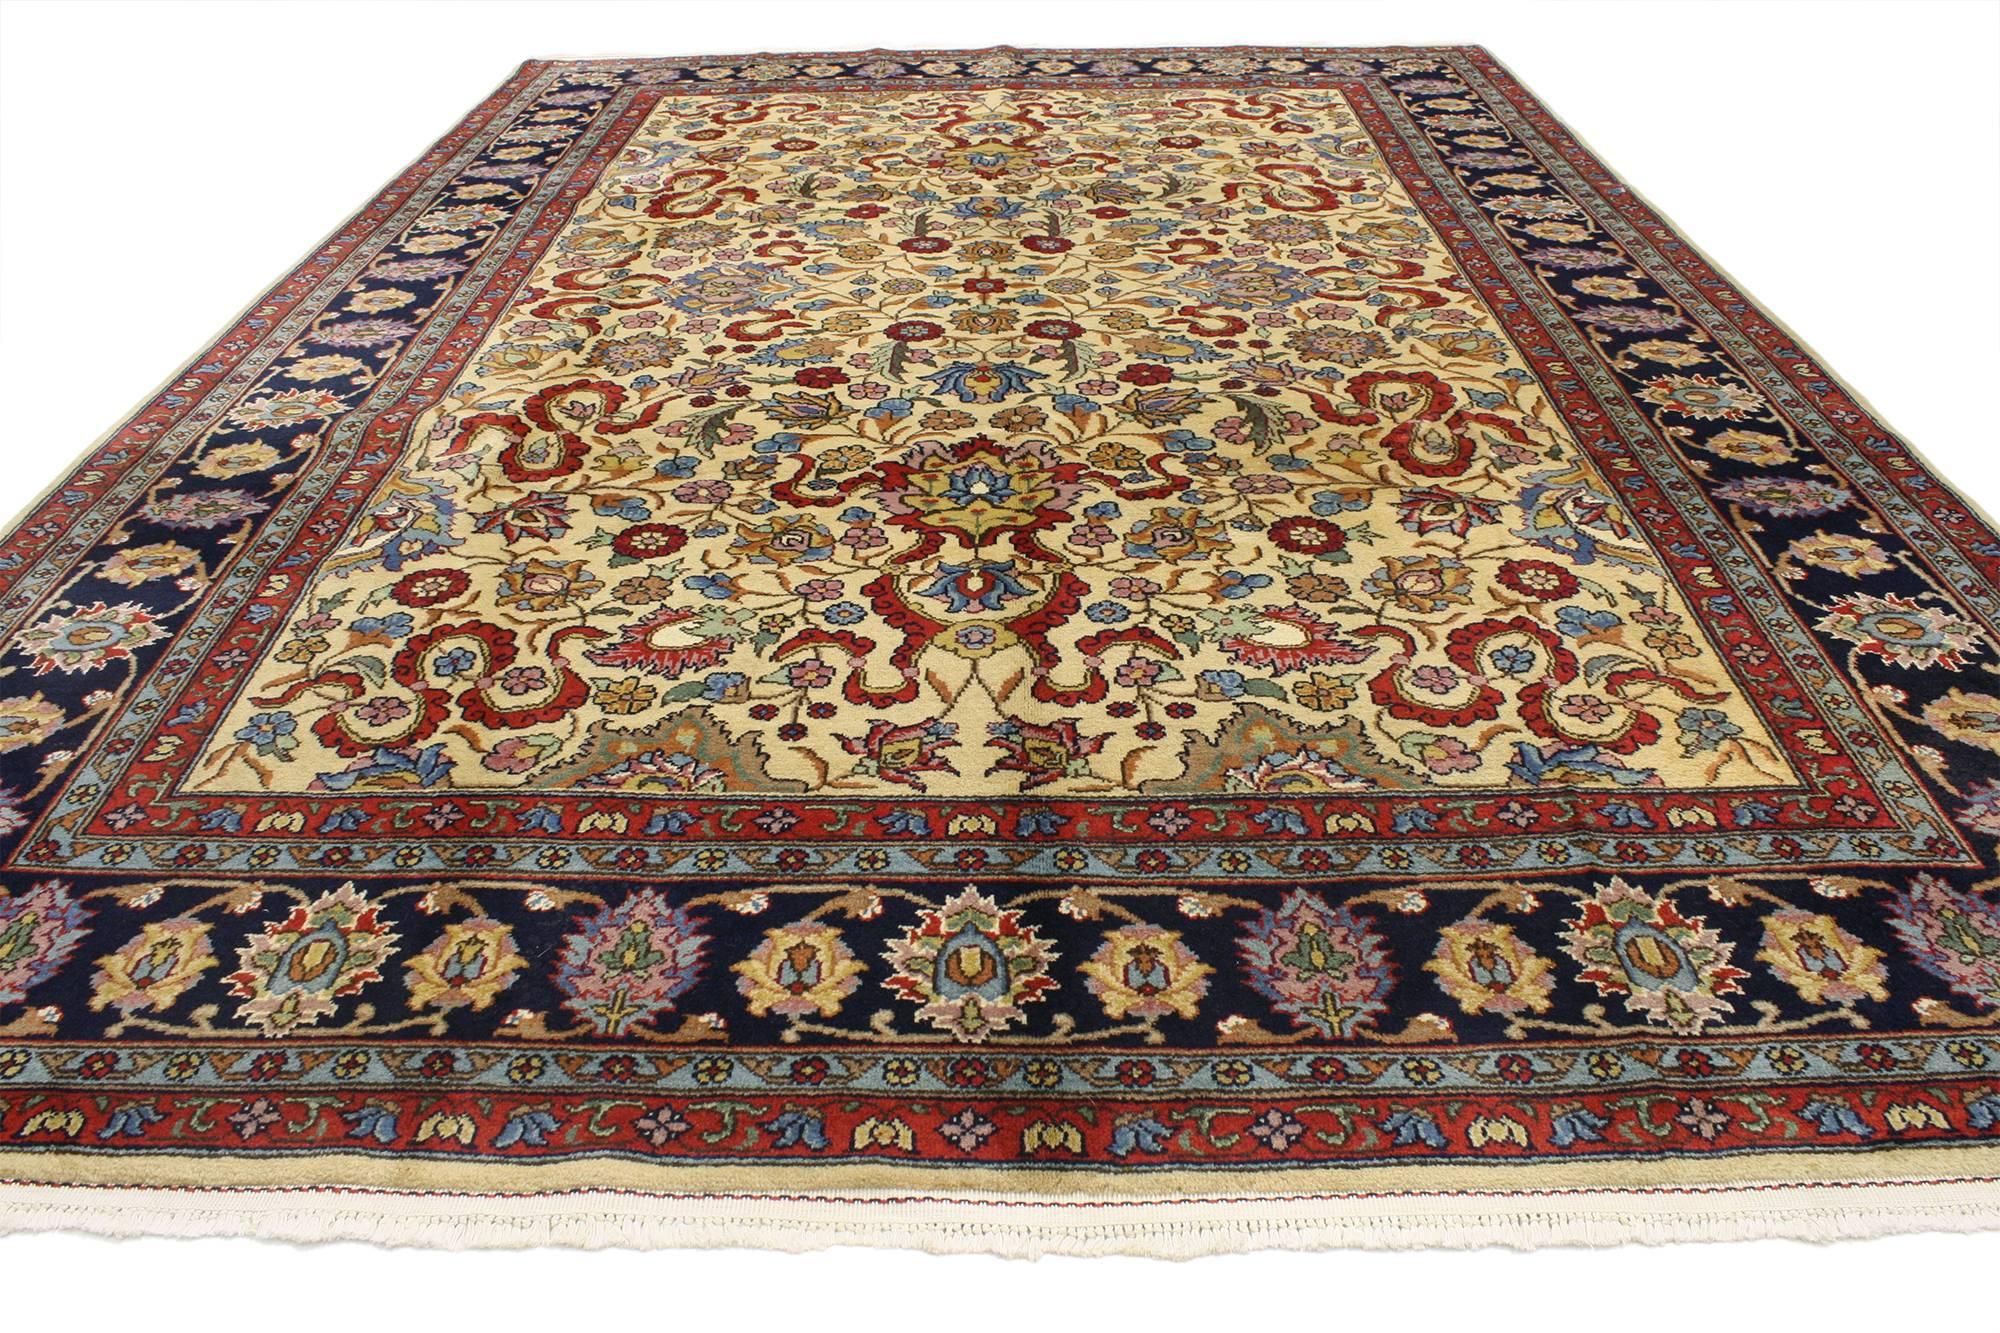 74660, vintage Romanian area rug with Cloudband design. This hand-knotted wool vintage Romanian area rug features a unique Cloudband design in an allover pattern. Elegant and Asian-inspired, the appeal of this vintage Romanian rug is in the details.